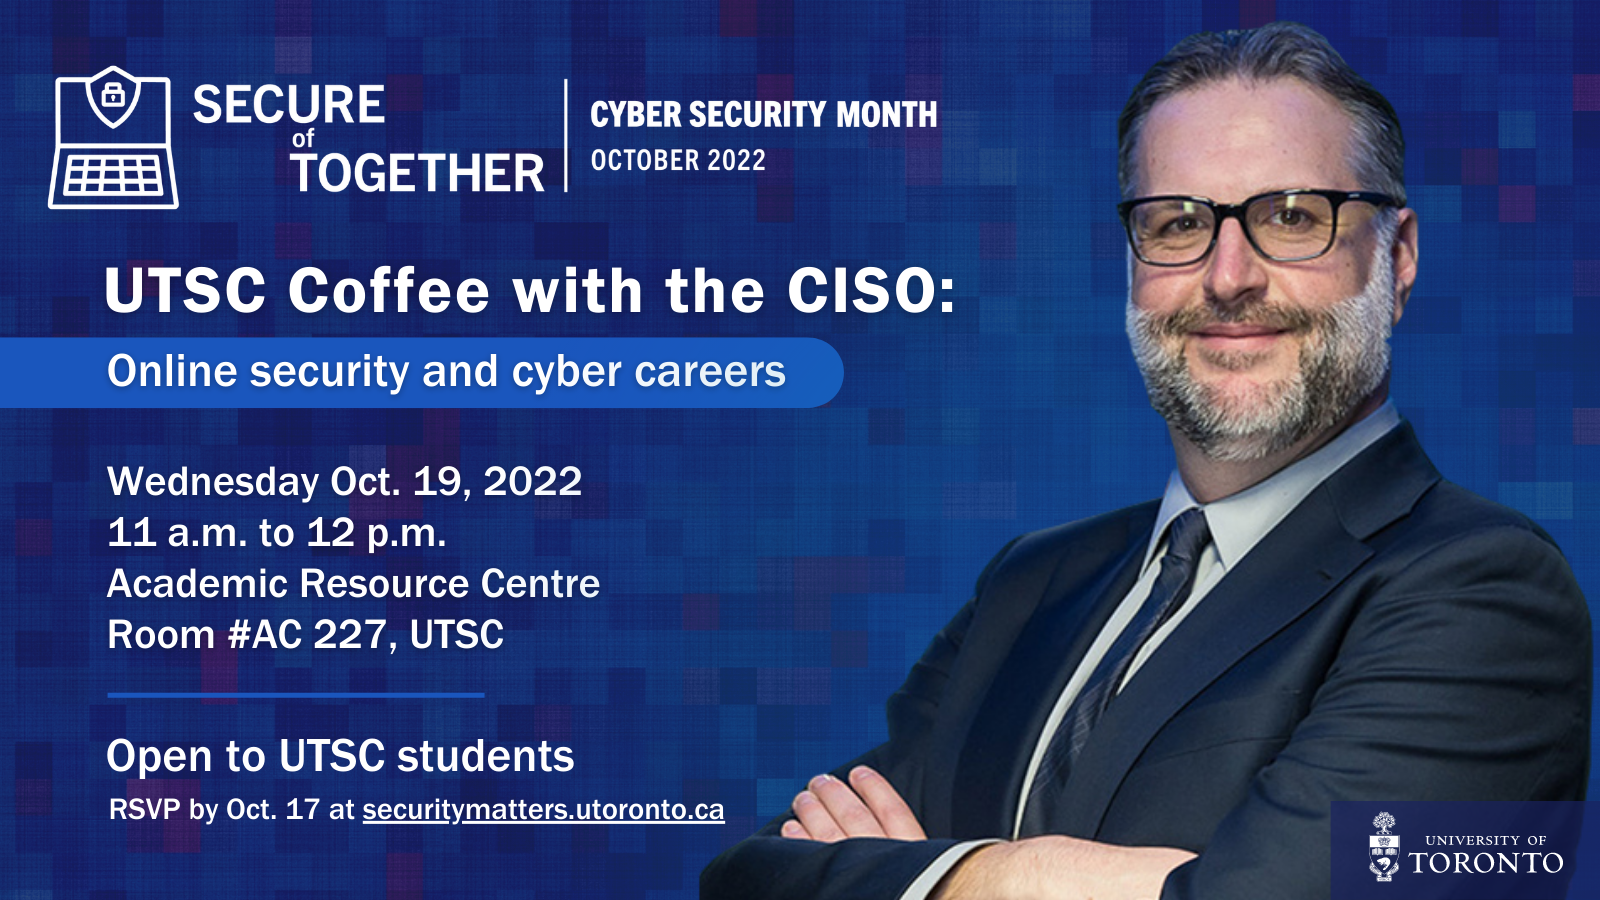 UTSC Coffee with the CISO